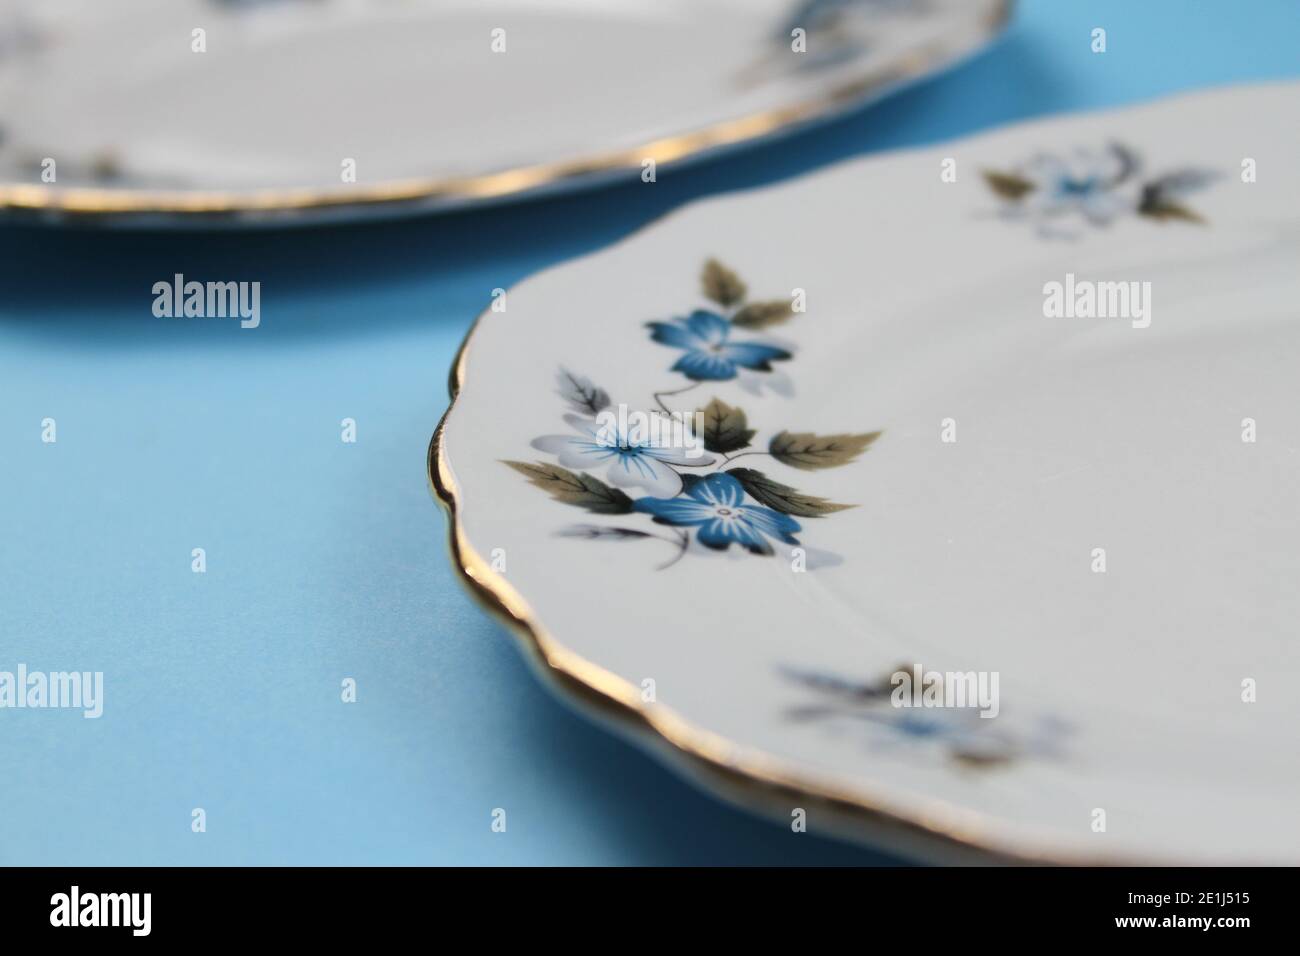 Close-up of a vintage gold-rimmed plate with blue flower detail against a plain background Stock Photo